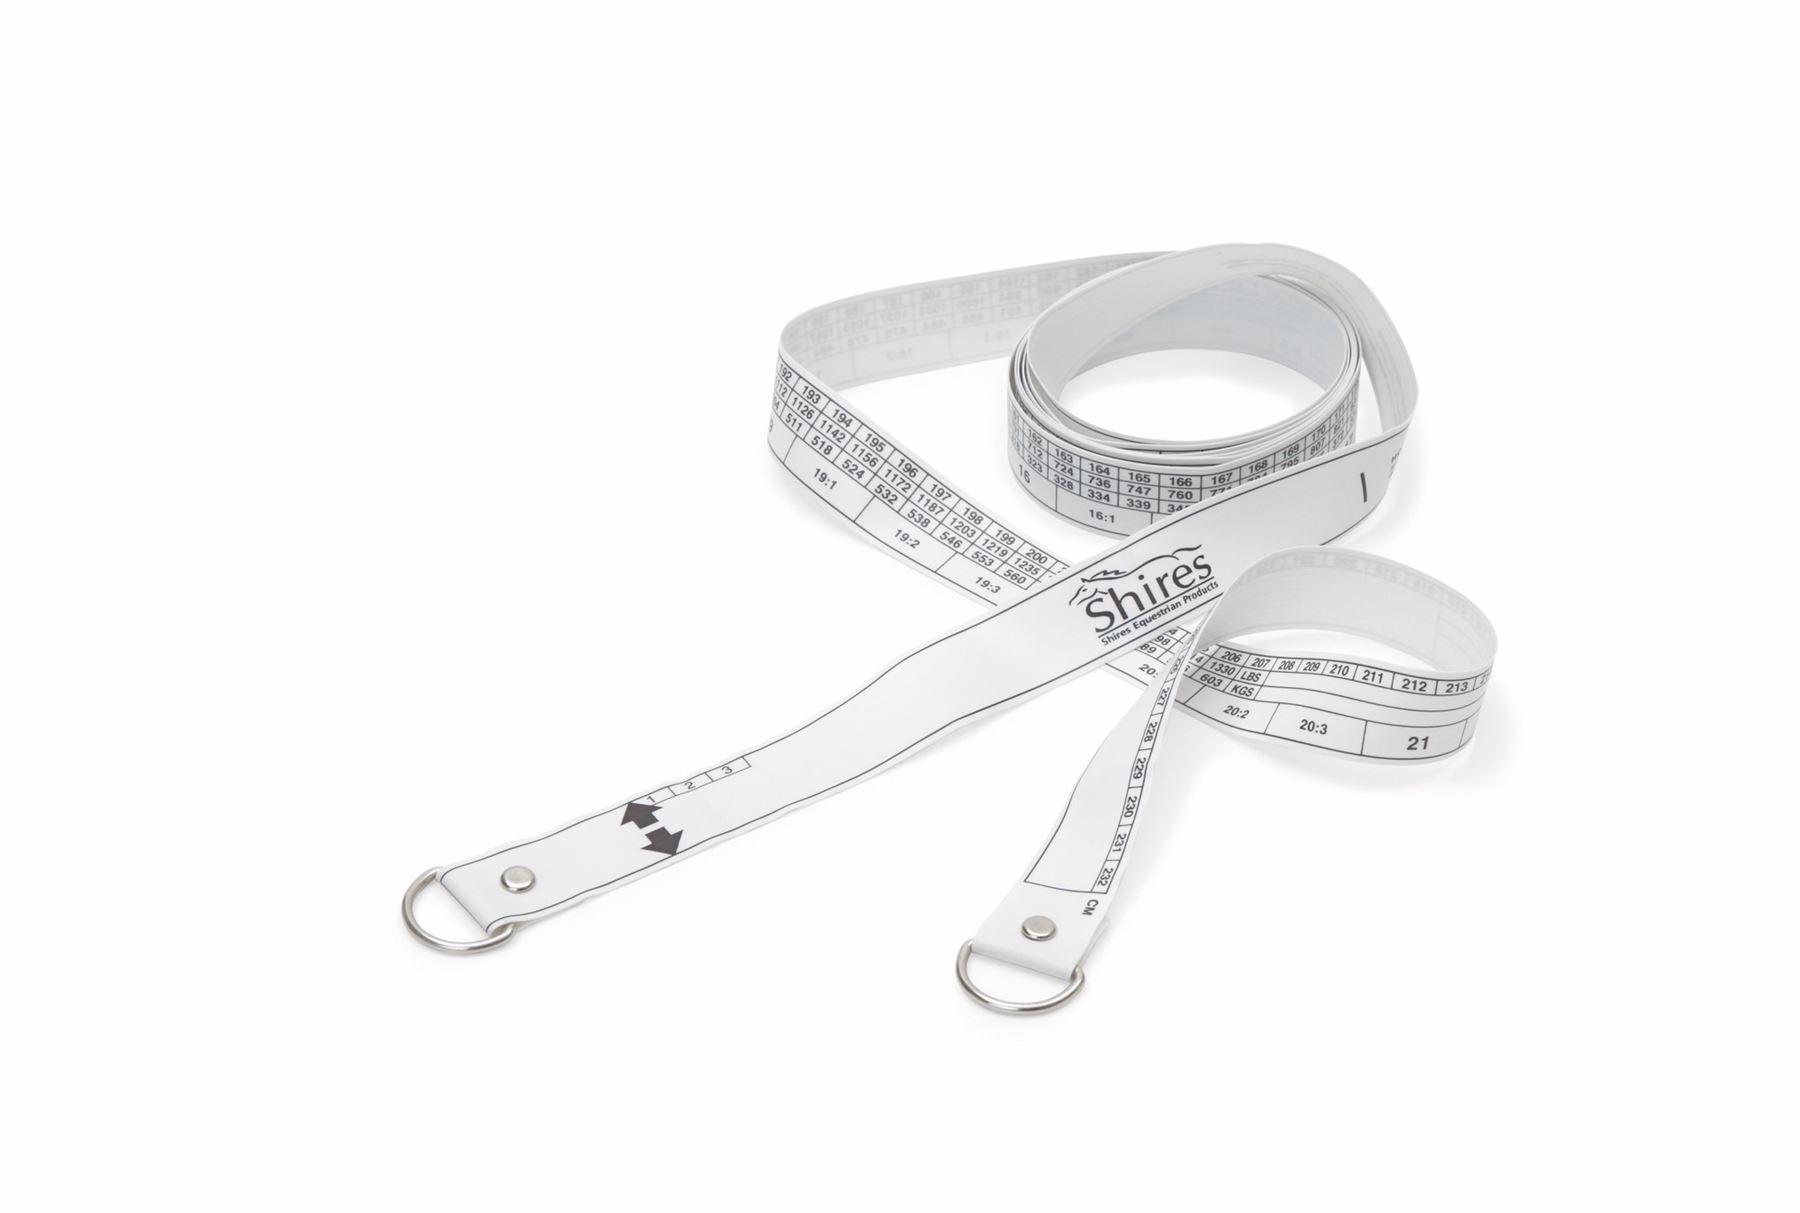 Shires Horse And Pony Weighband - Just Horse Riders